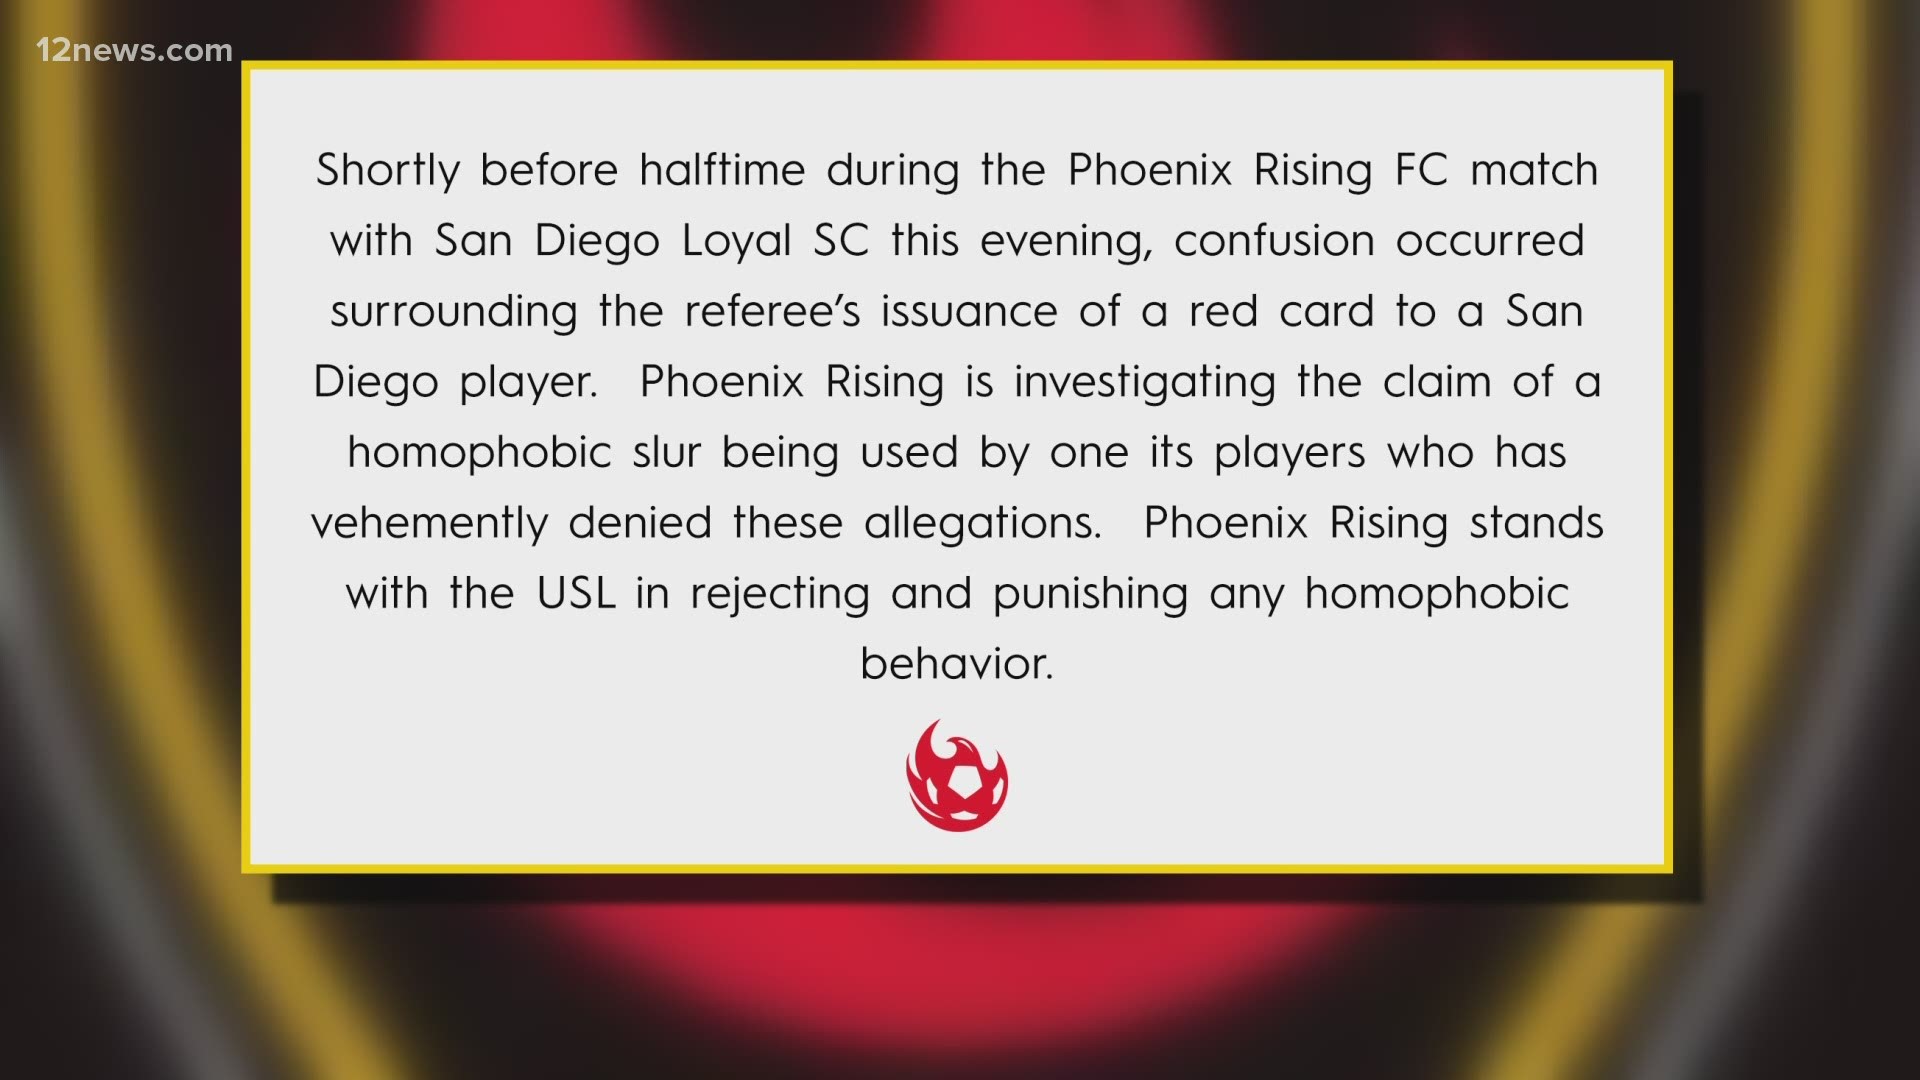 The Phoenix Rising incident comes just one week after San Diego Loyal forfeited a game due to a racial slur.